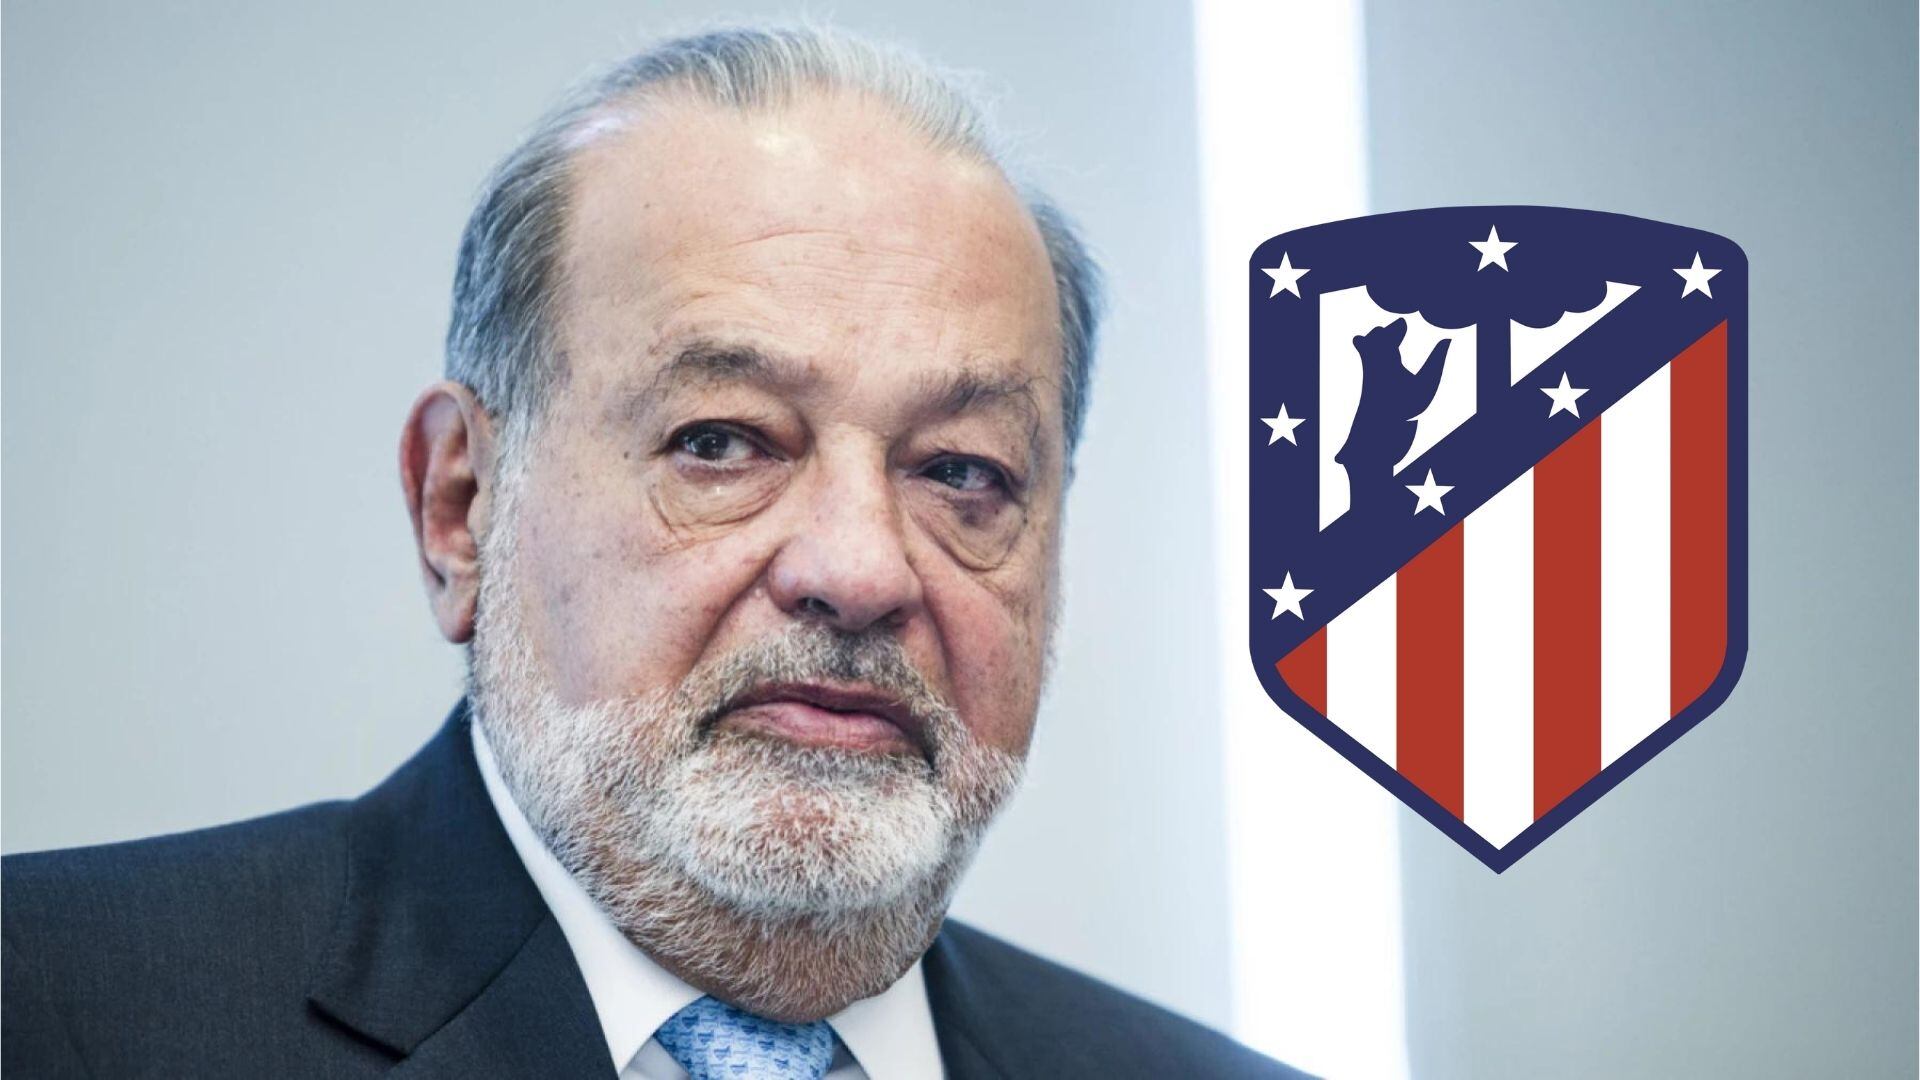 Carlos Slim would become Atlético Madrid’s next owner and have another Mexican in the team